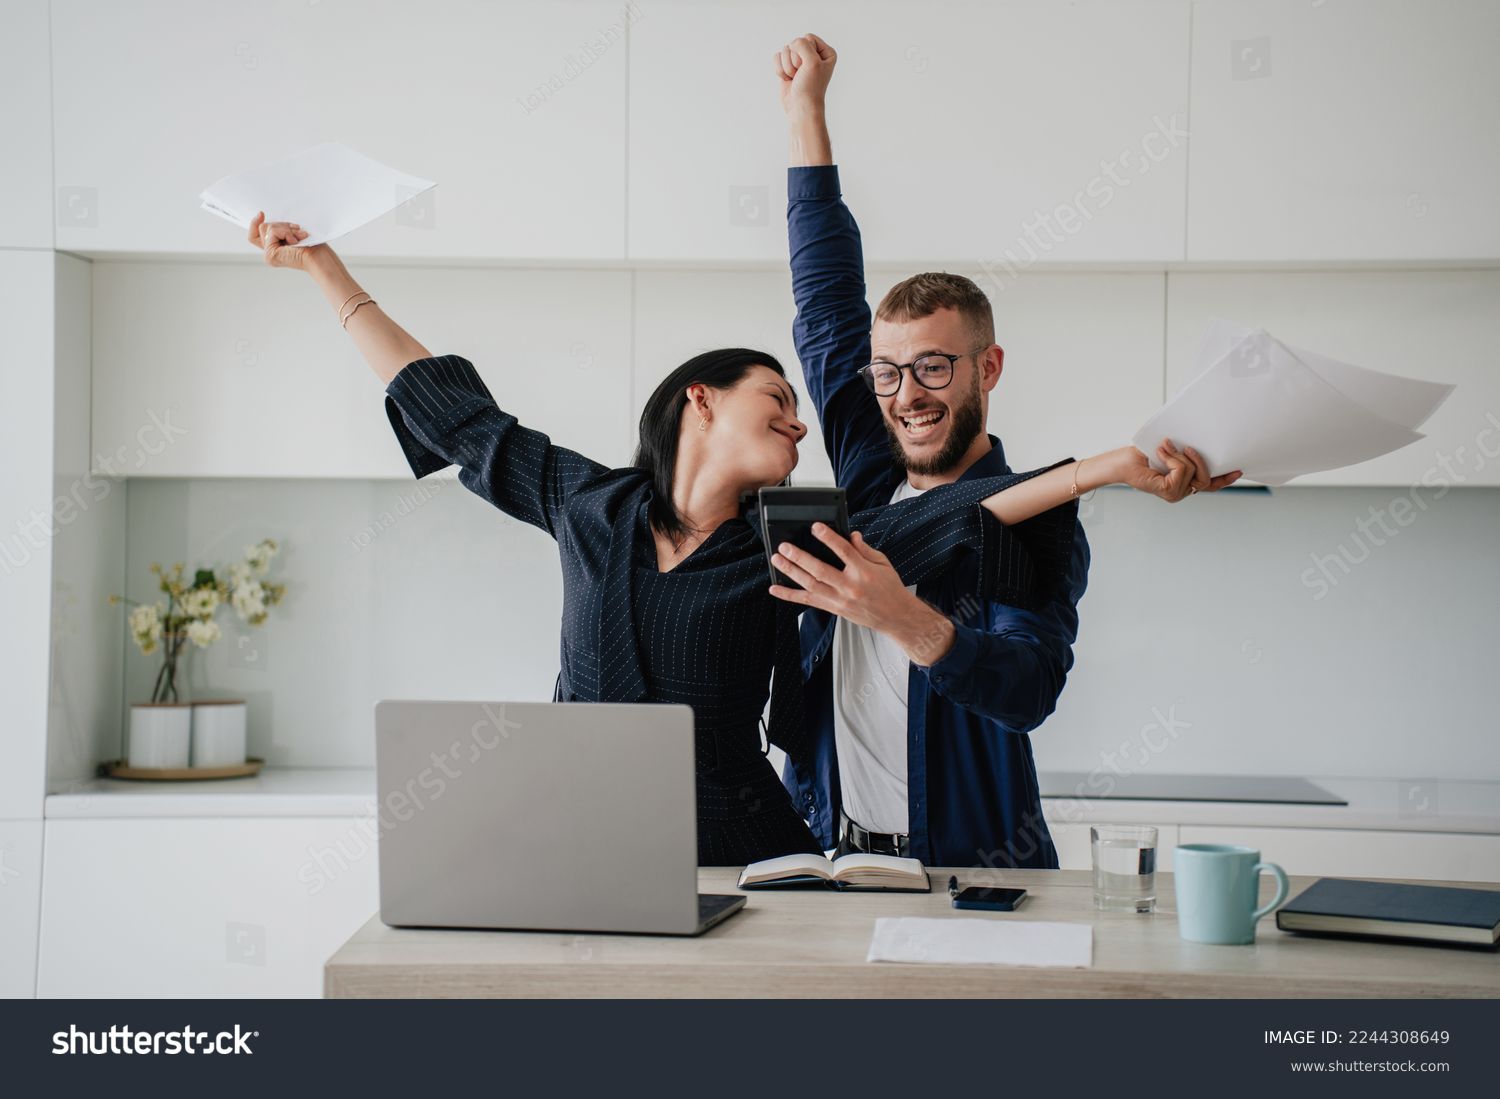 Excited caucasian couple after calculate their year earnings, celebrating successful business at new home using calculator, laptop. Woman raises hands in winner gesture holds papers. Financial freedom #2244308649